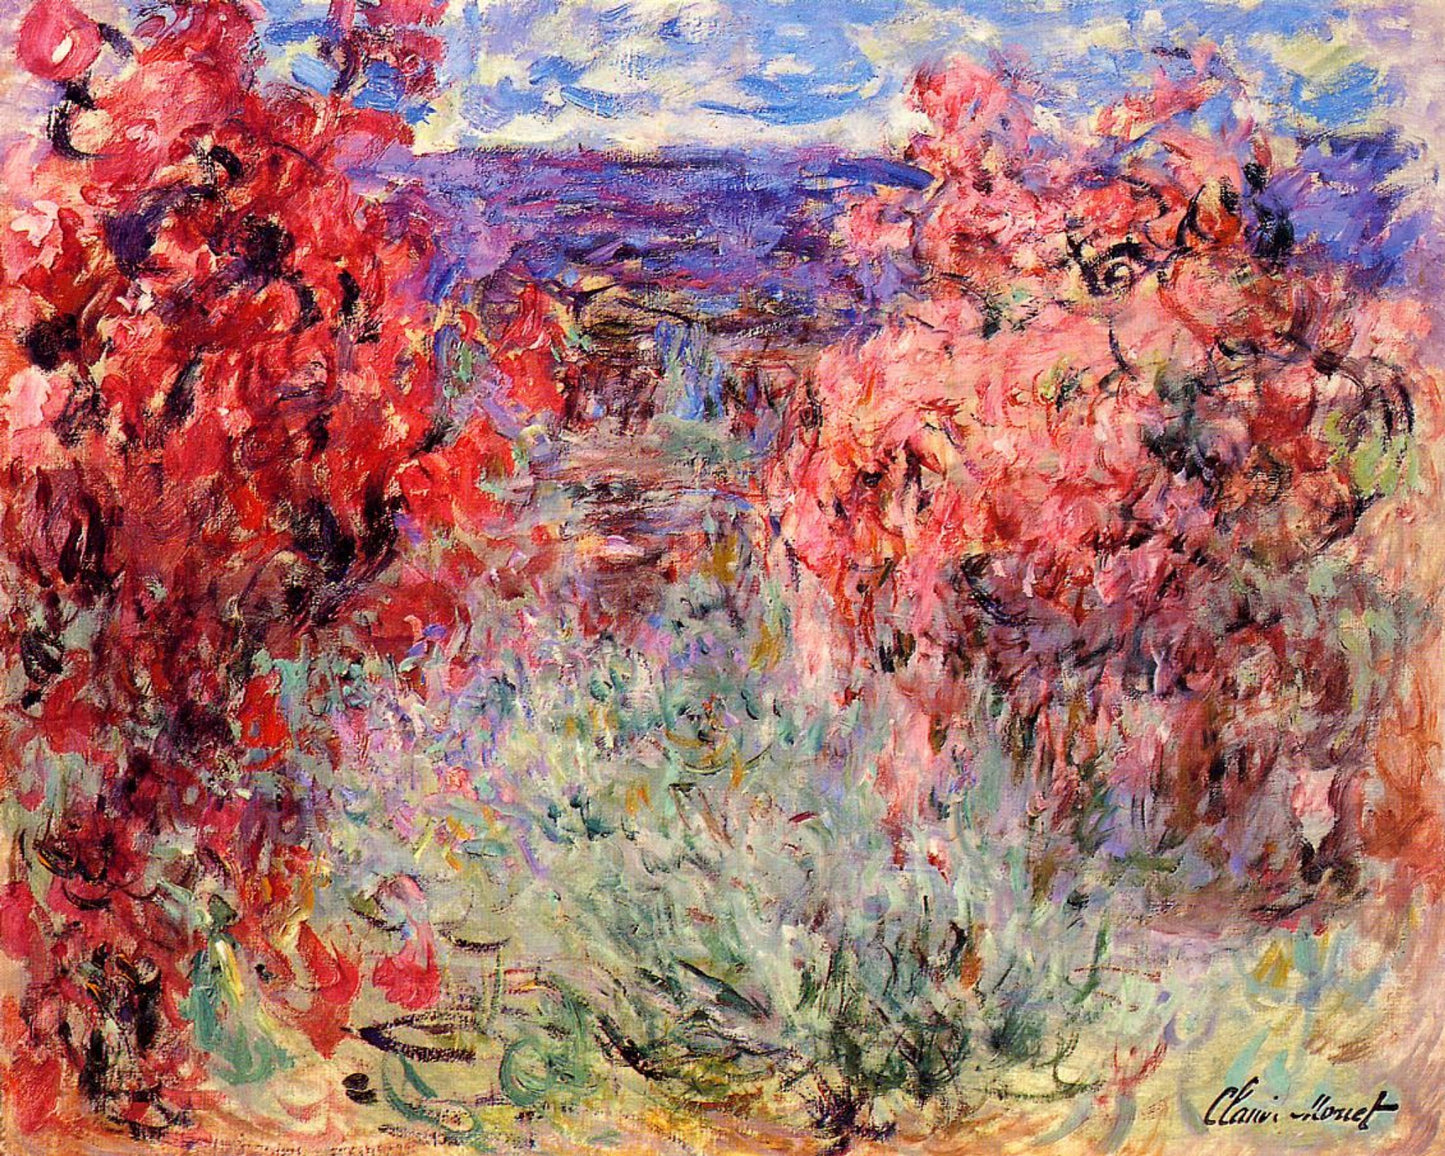 Flowering trees near the coast by Claude Monet - Van-Go Paint-By-Number Kit